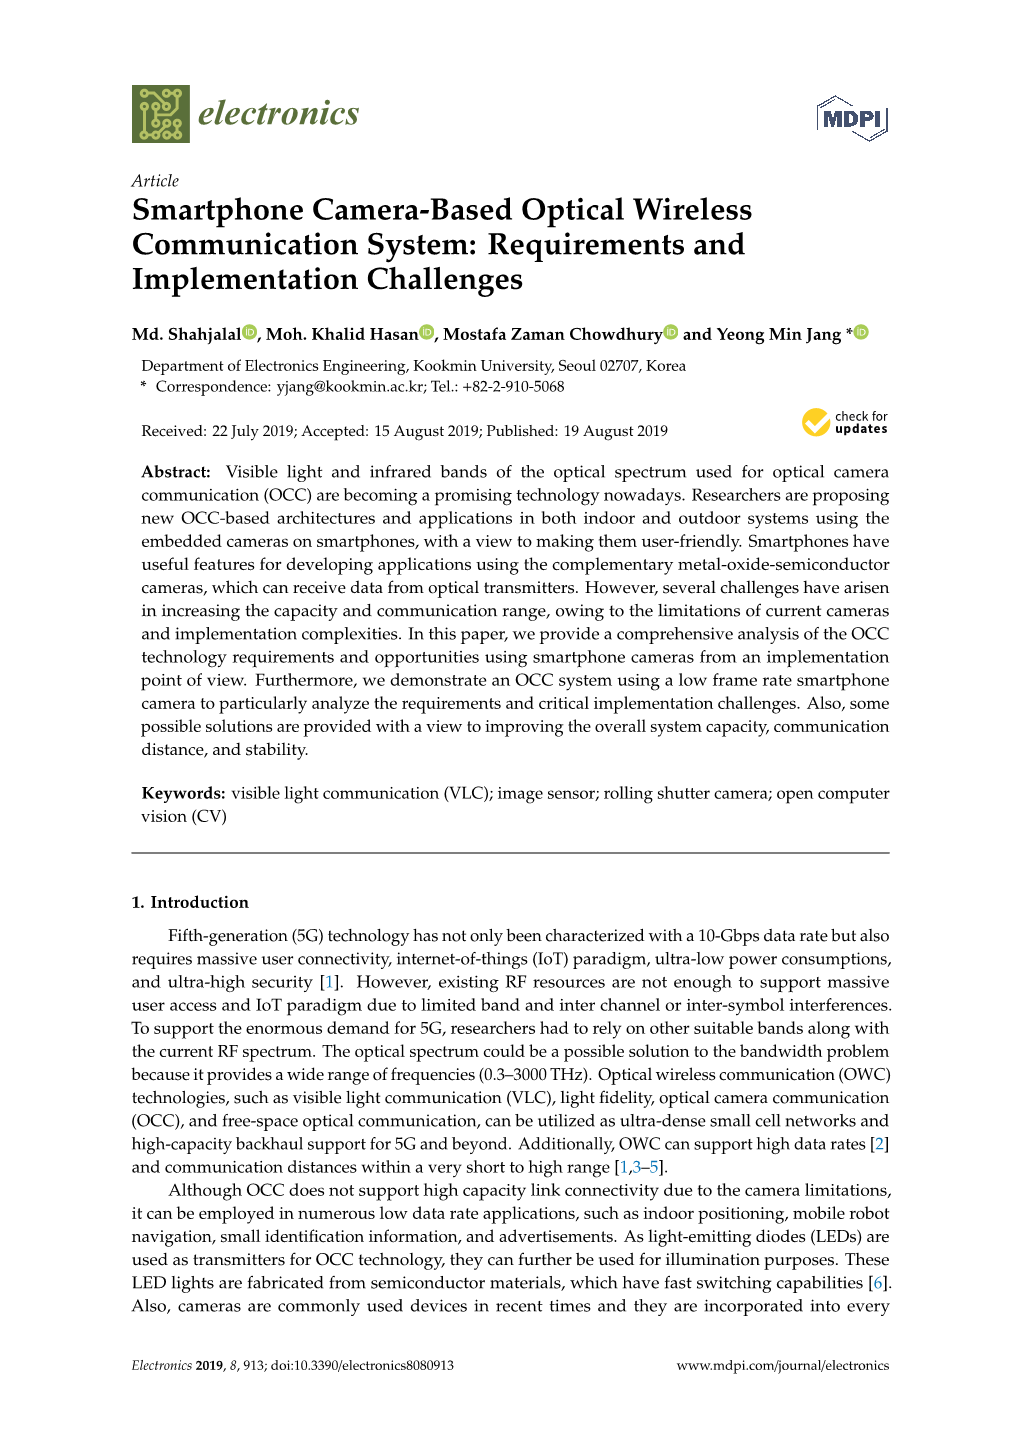 Smartphone Camera-Based Optical Wireless Communication System: Requirements and Implementation Challenges